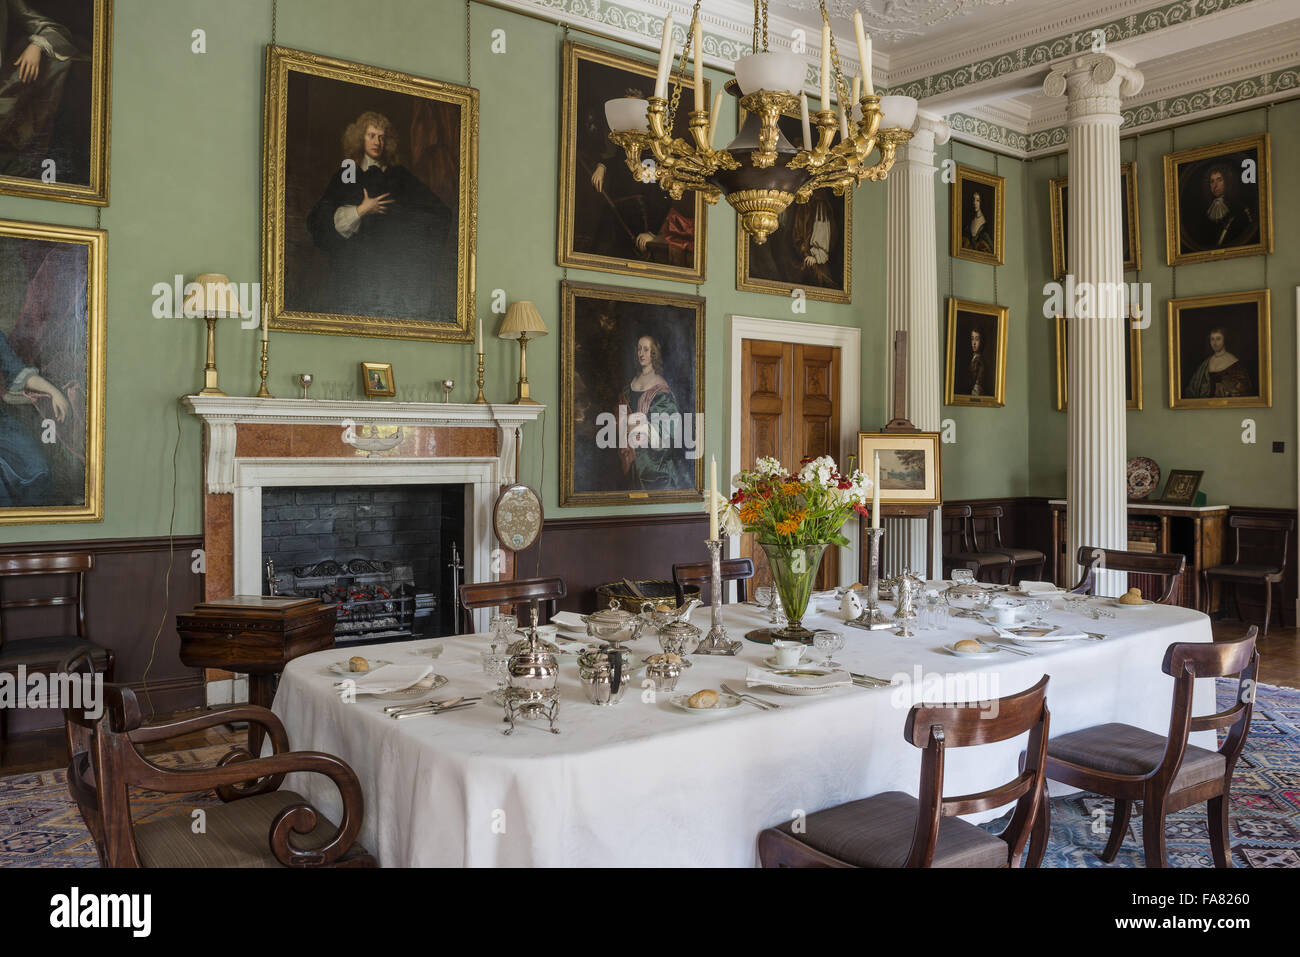 The Dining Room at Killerton, Devon. This room has been the Dining Room at Killerton since the Edwardian period, having originally been designed as the 'Great Parlour'. Stock Photo